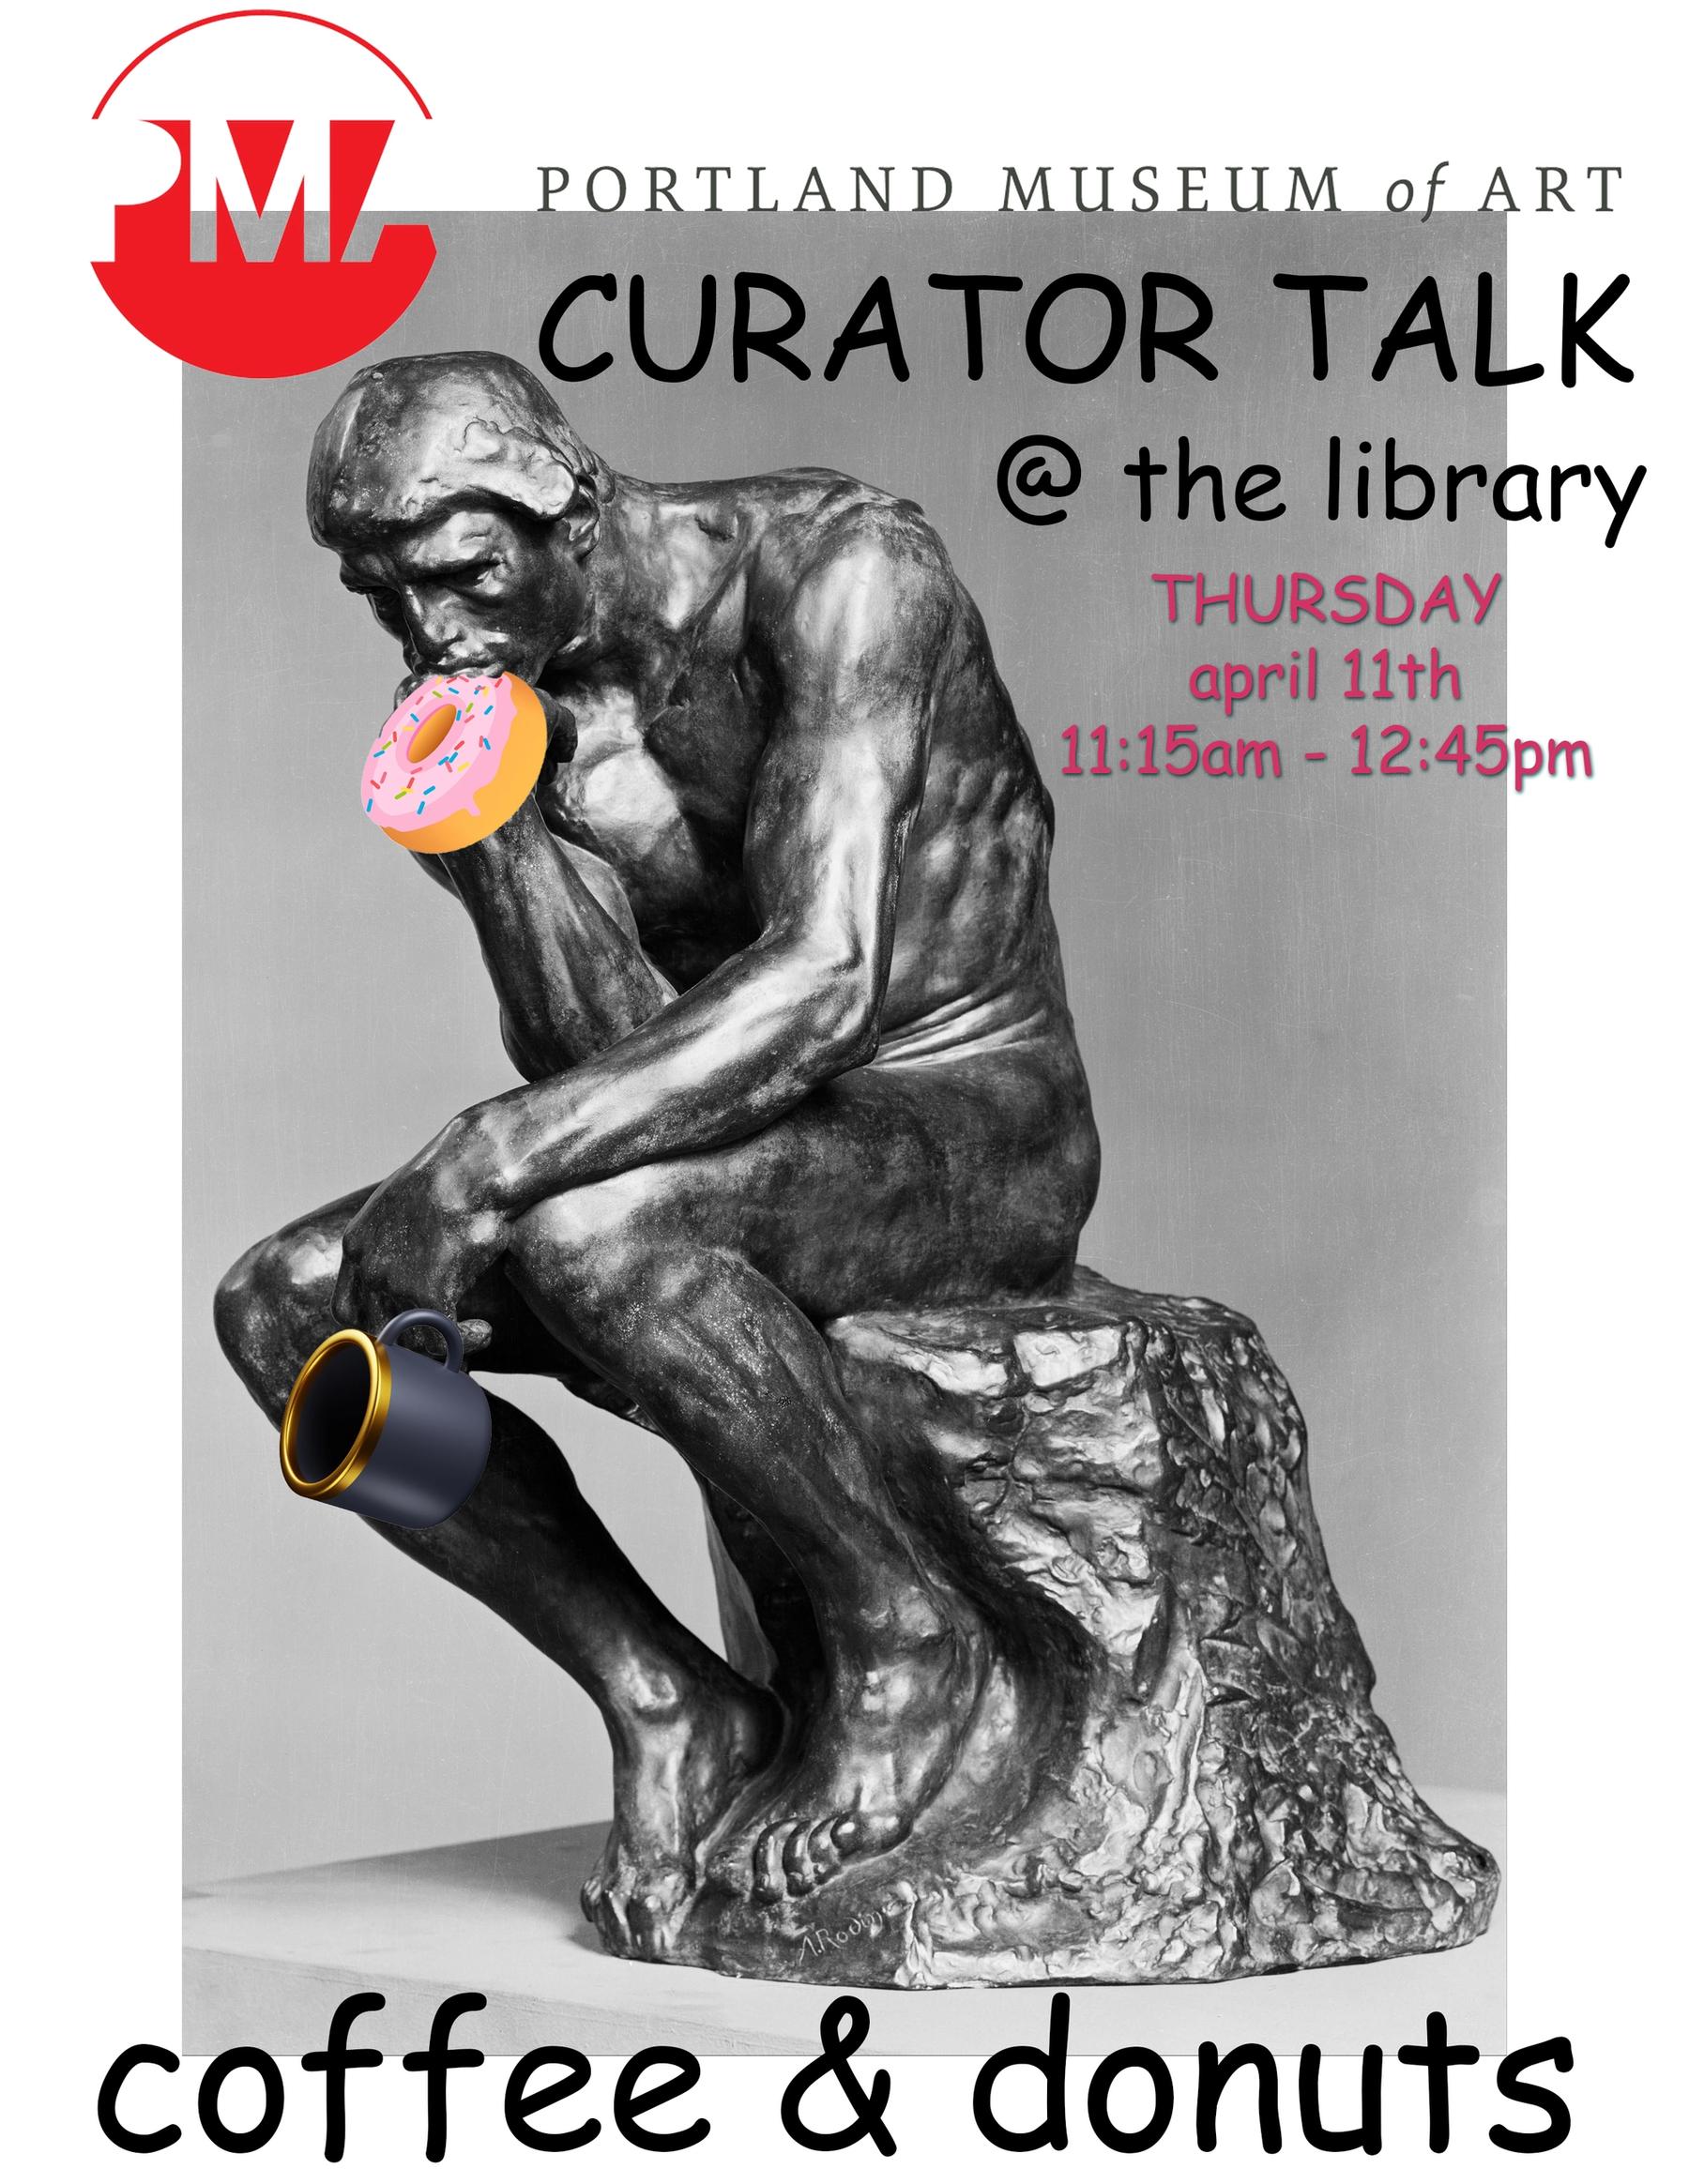 Flyer for PMA Curator Talk at the Library with Coffee and Donuts.